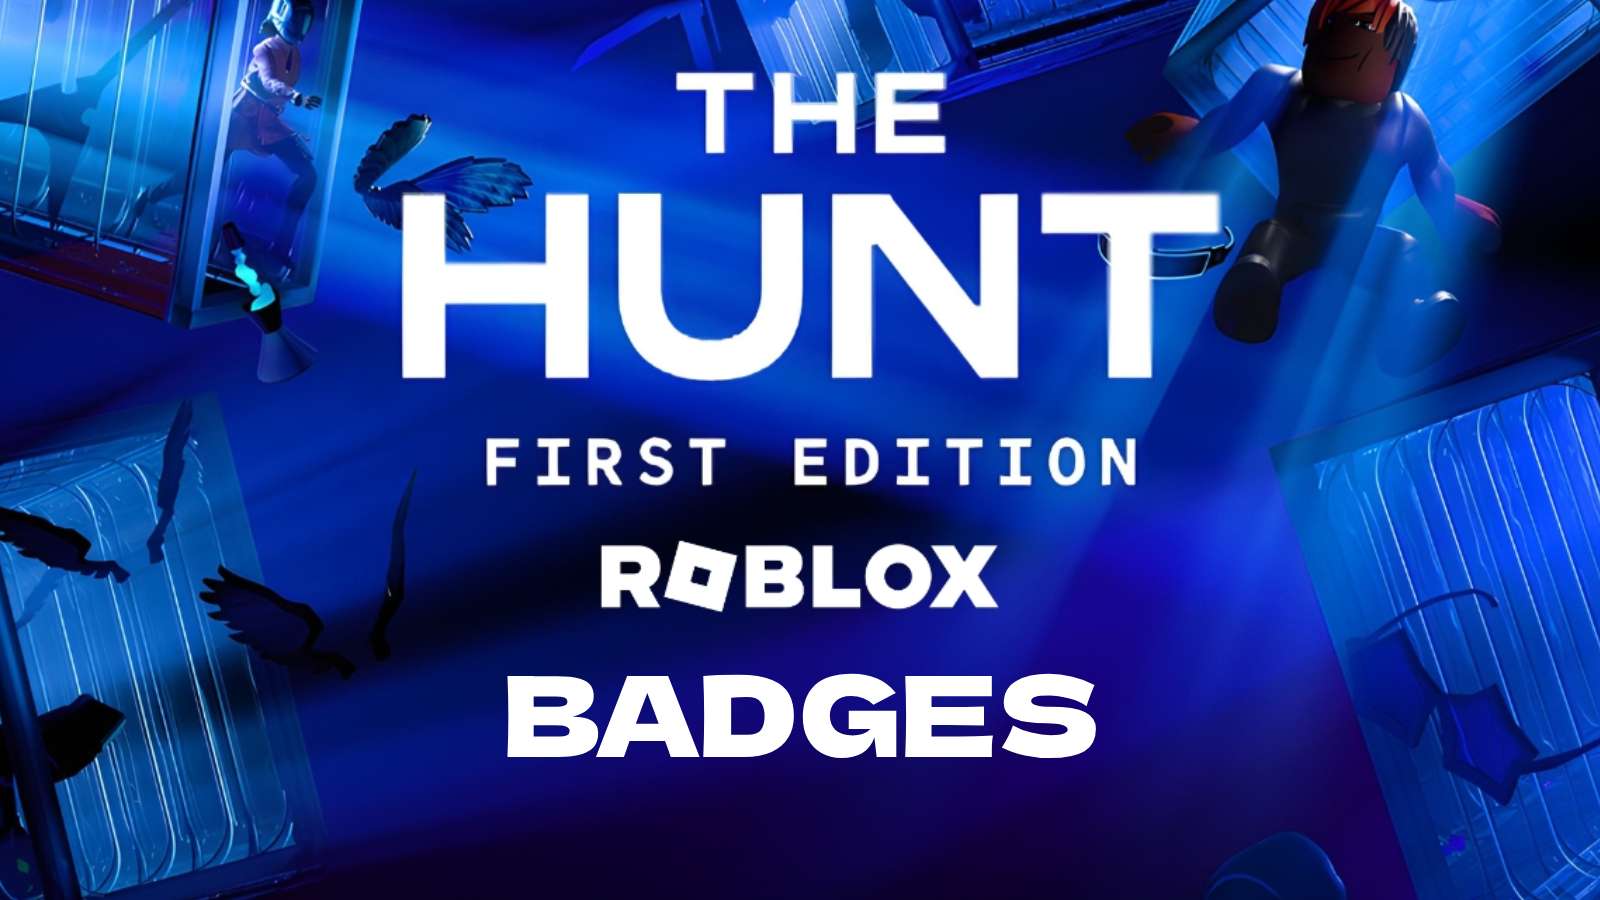 cover art for all the badges available in The Hunt: First Edition on Roblox.